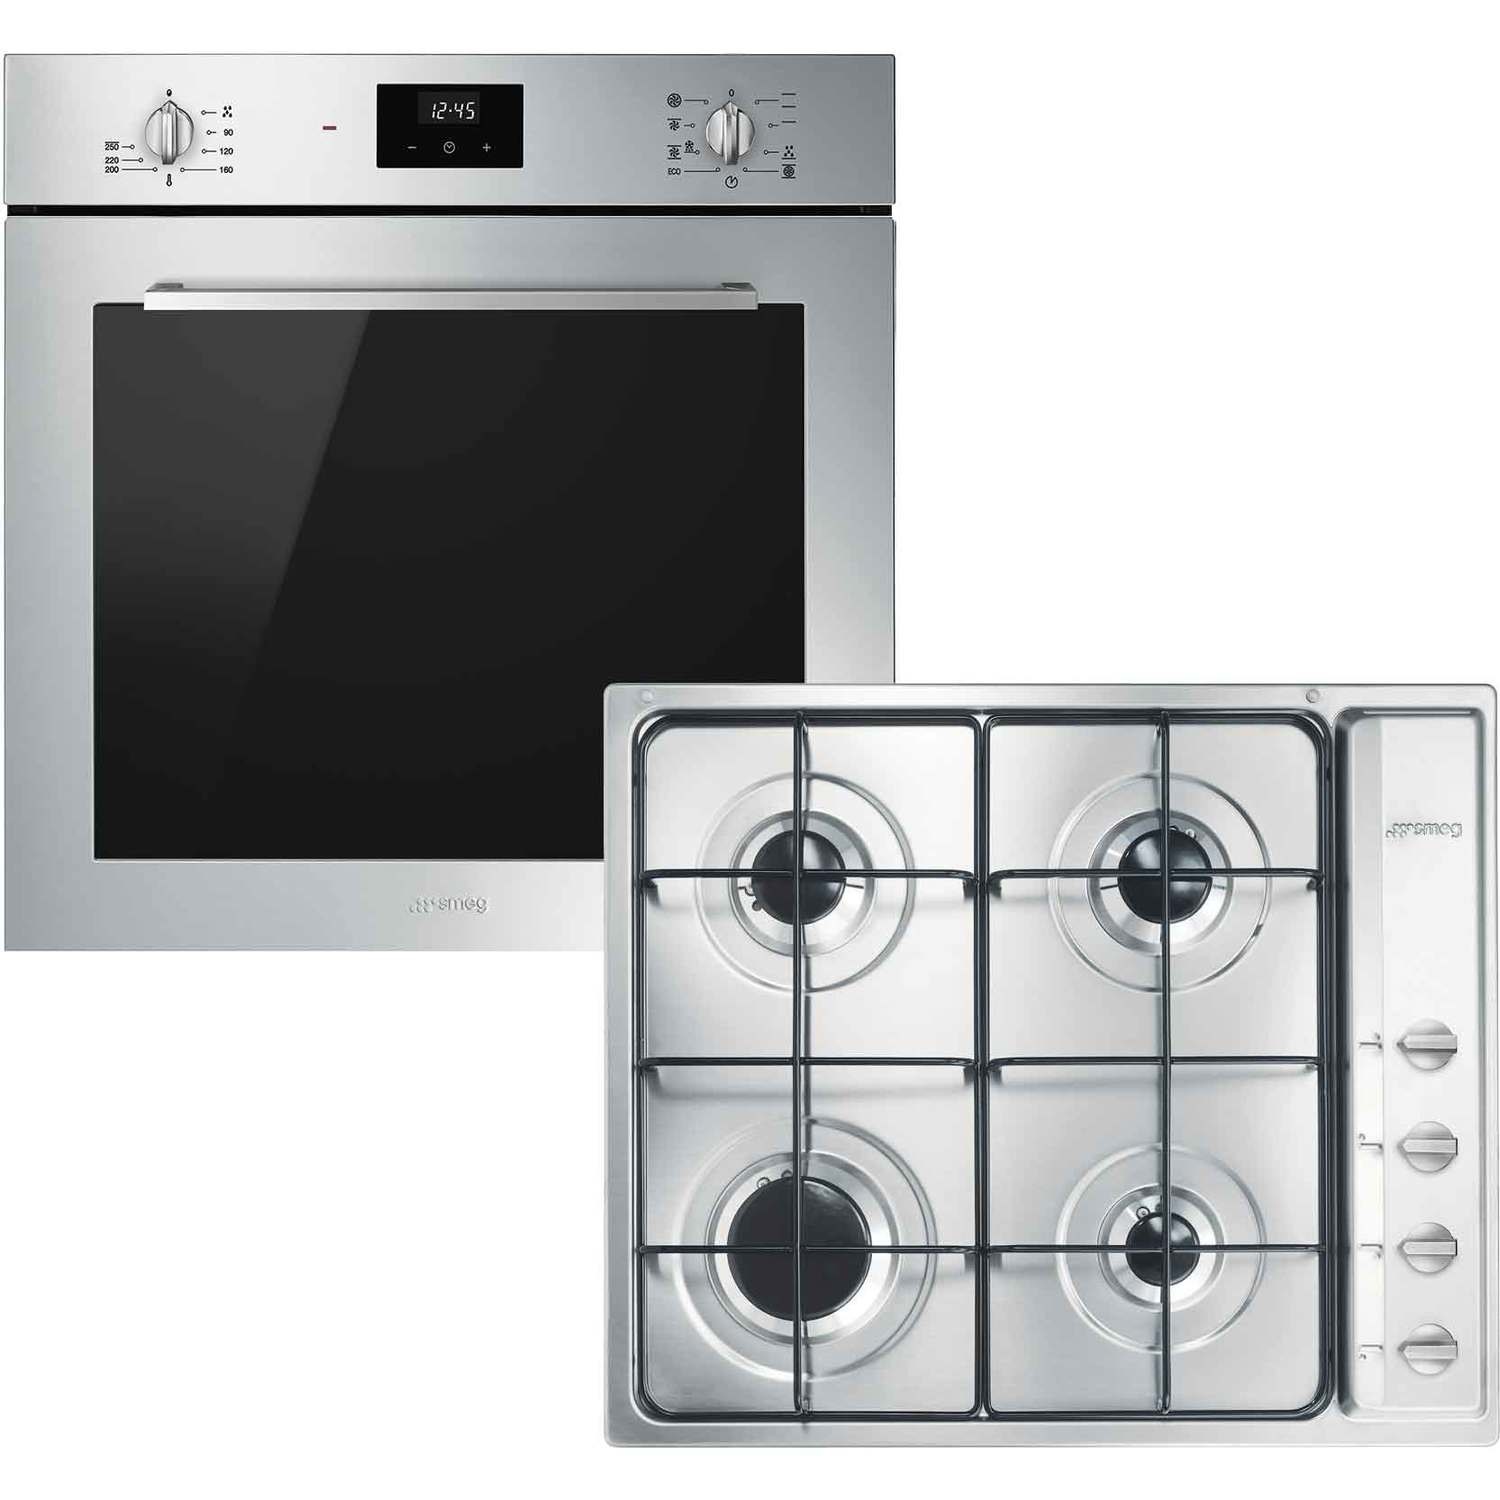 Photos - Other for Computer Smeg Cucina Multifunction Electric Oven & Gas Hob Pack CCGASPK 